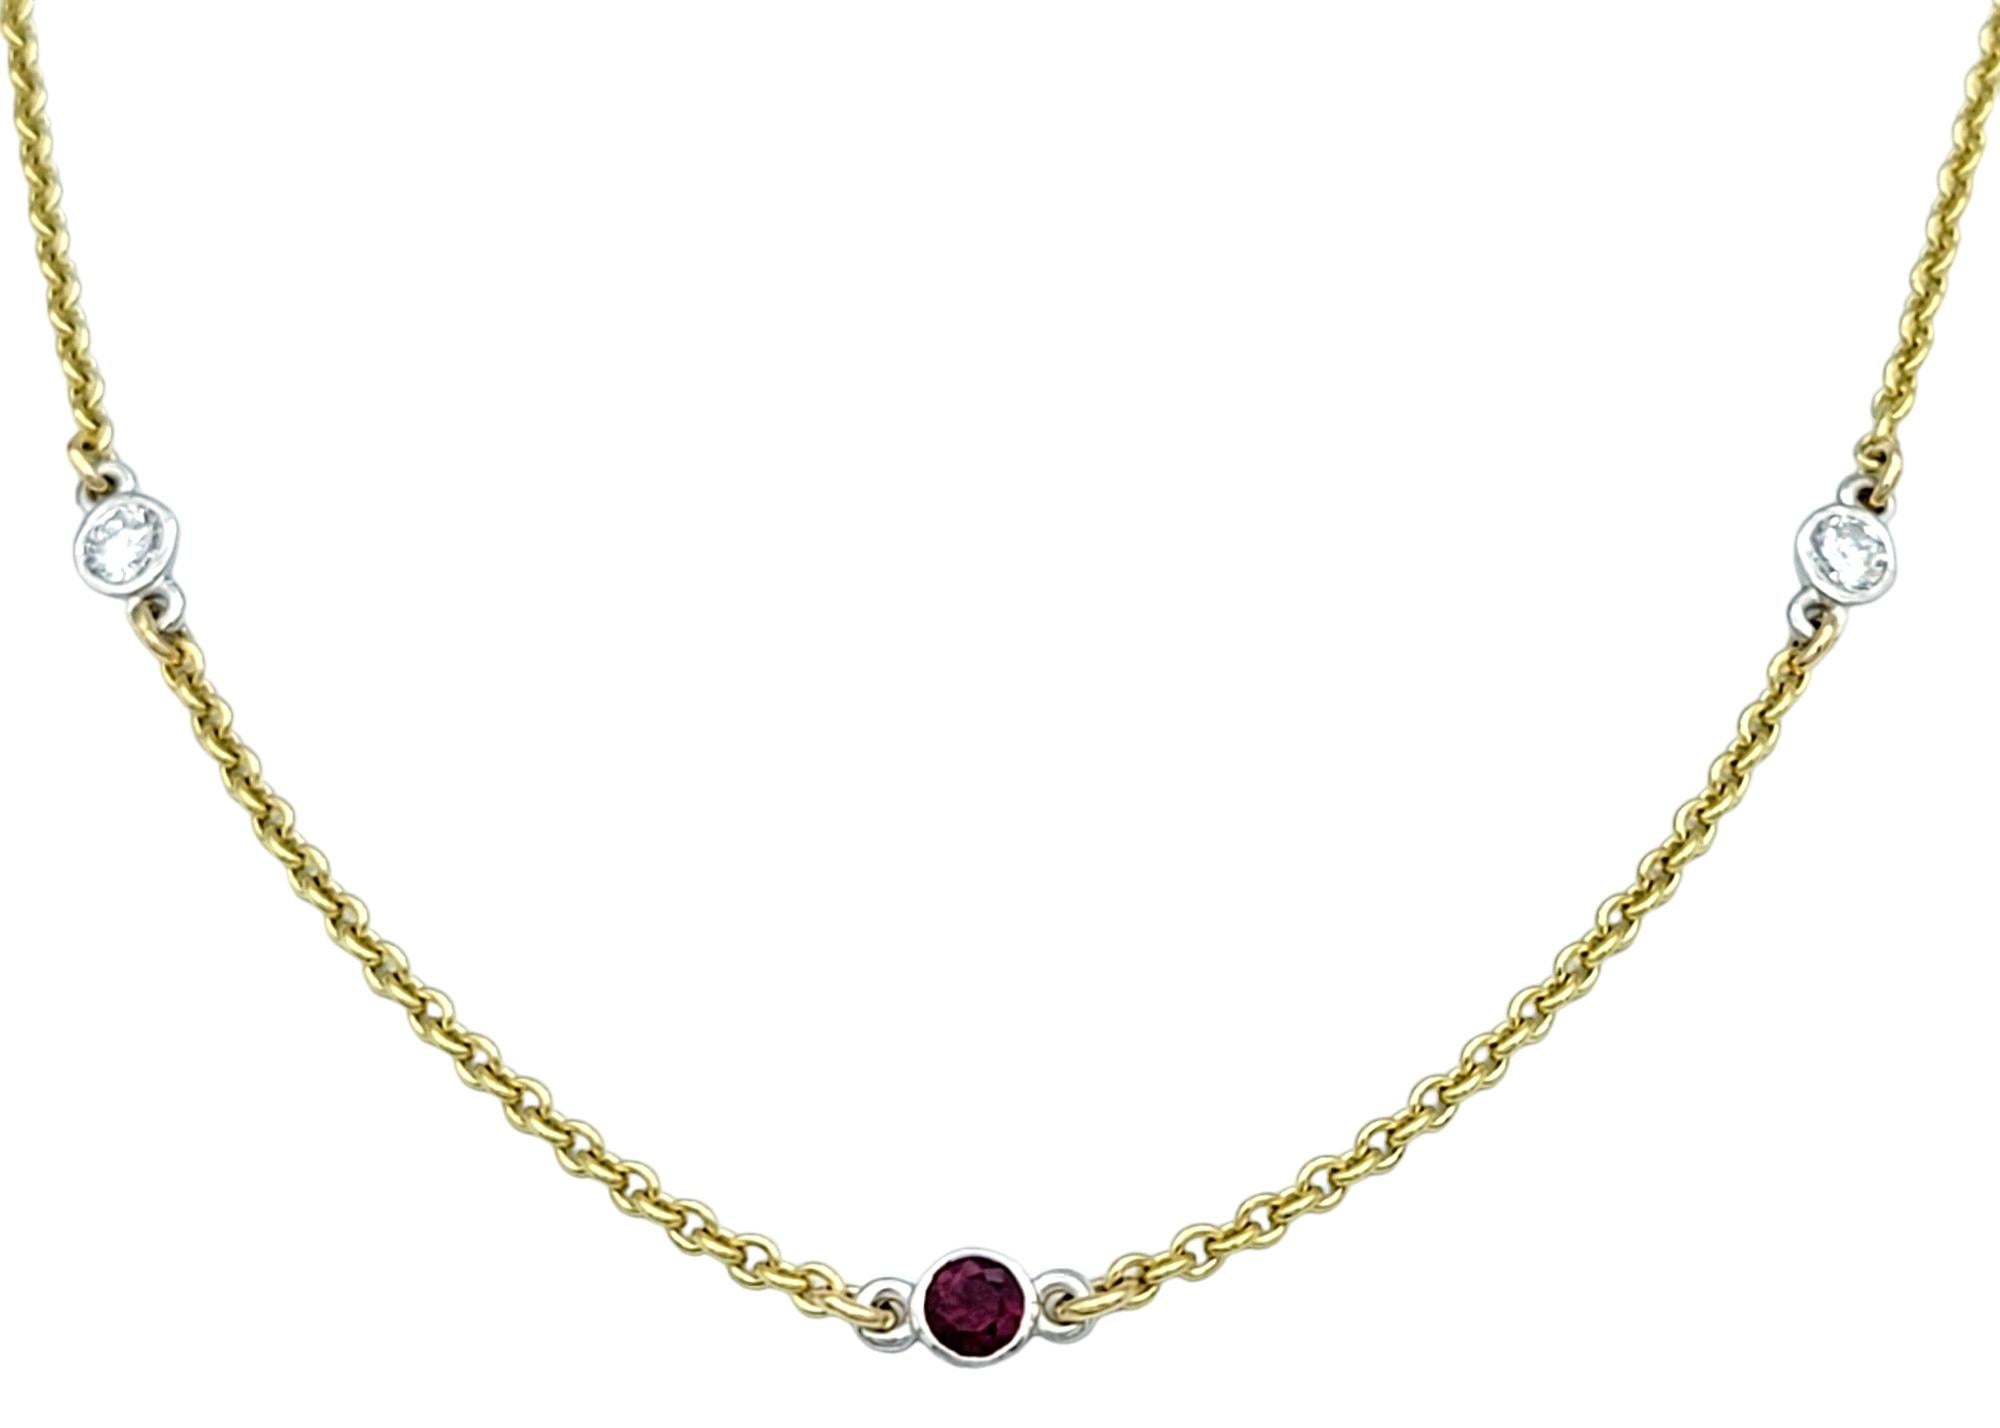 This stunning chain station necklace features alternating diamond and ruby bezel stations set in luxurious 18 karat yellow gold. Each station showcases a sparkling round diamond or a vibrant round ruby, creating a striking contrast along the length